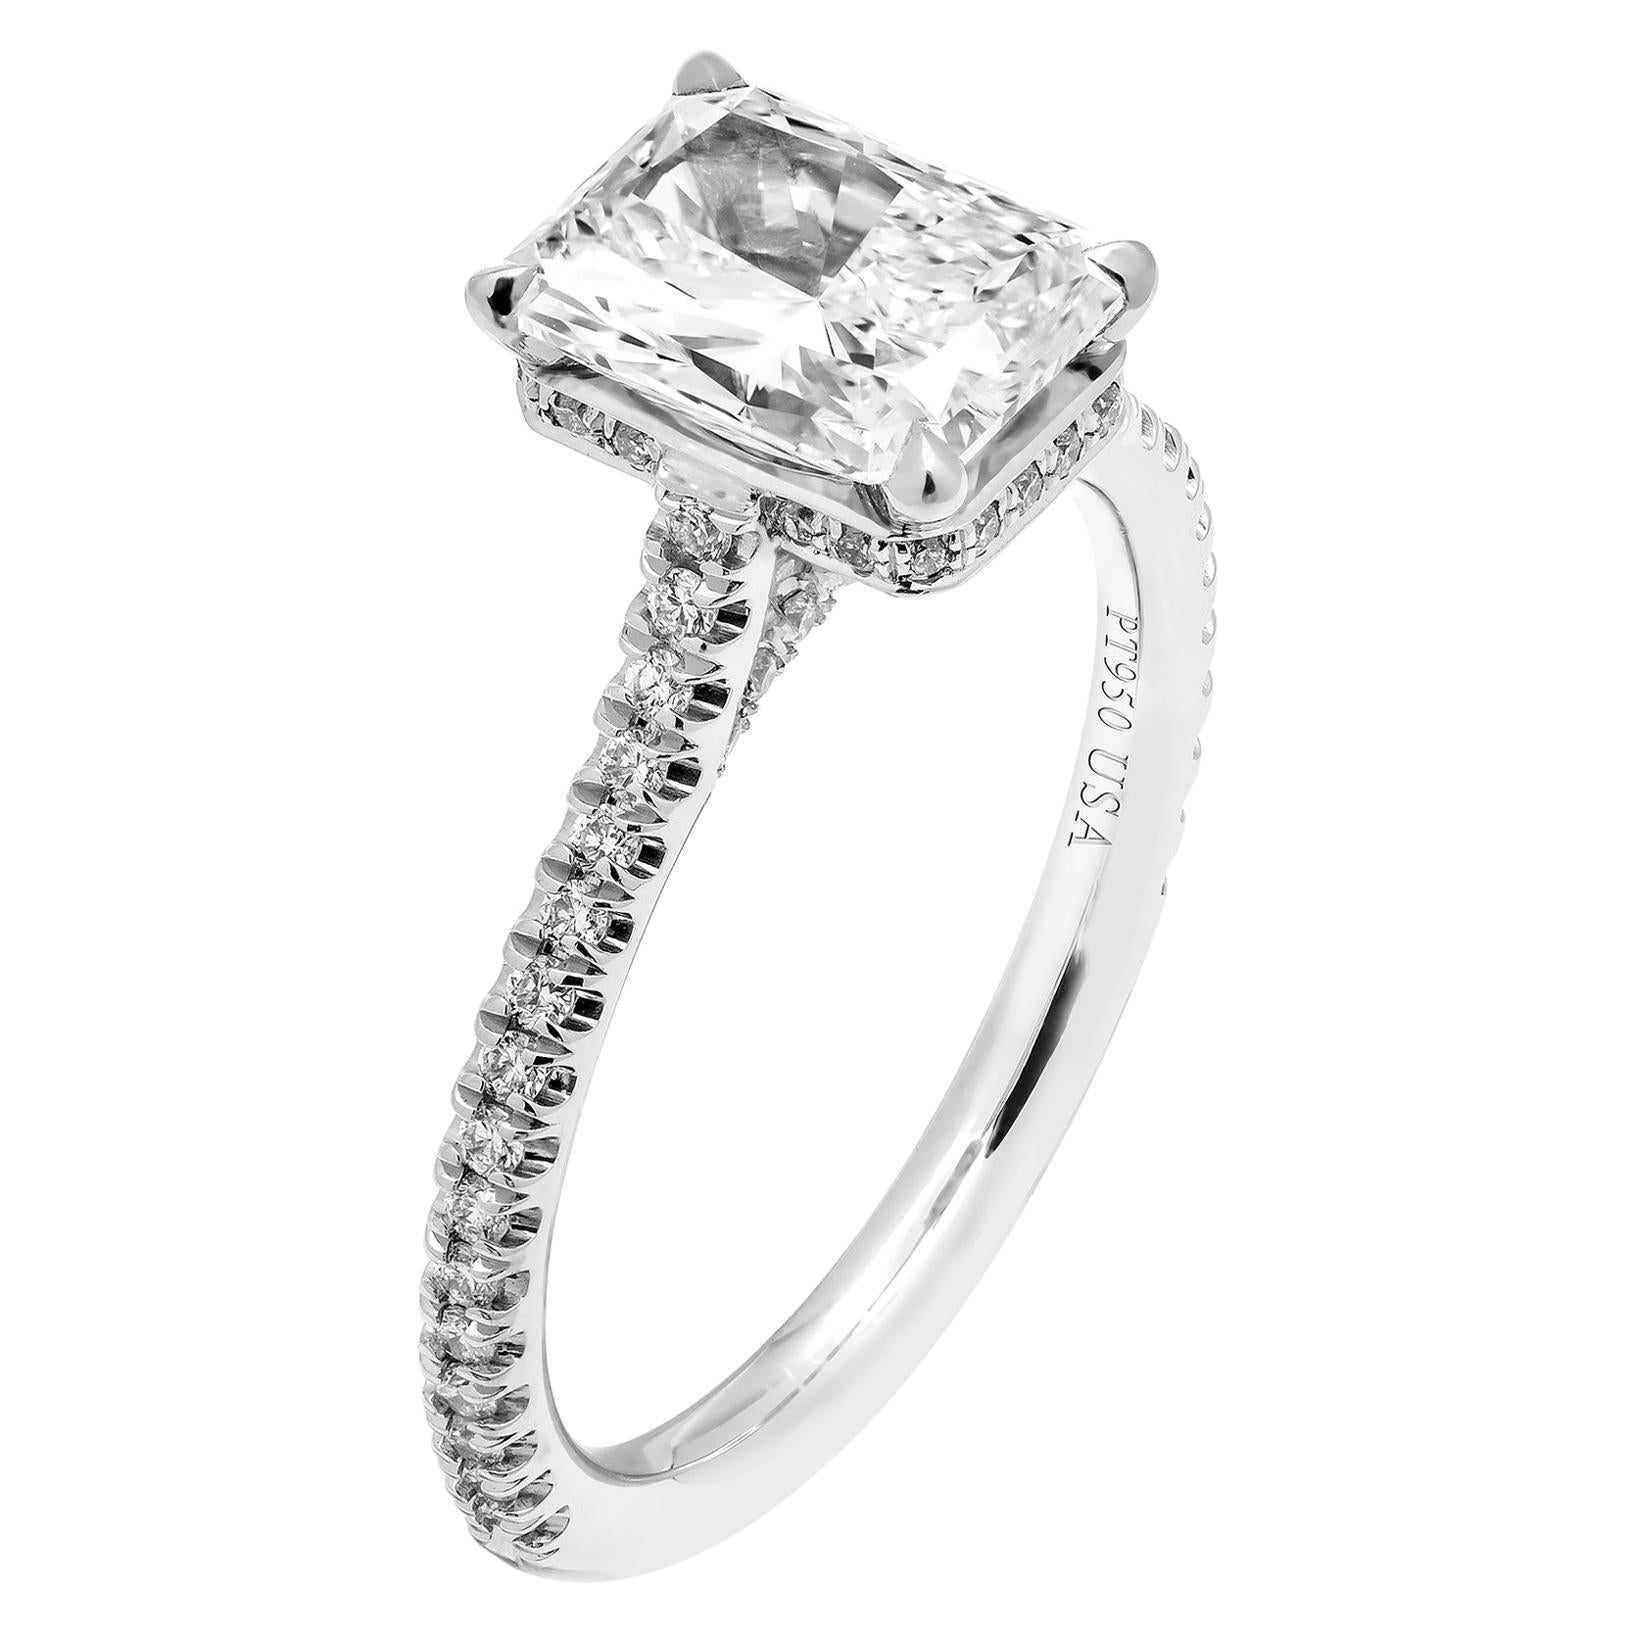 GIA Certified Engagement Ring with 1.71 Carat Radiant Cut Diamond